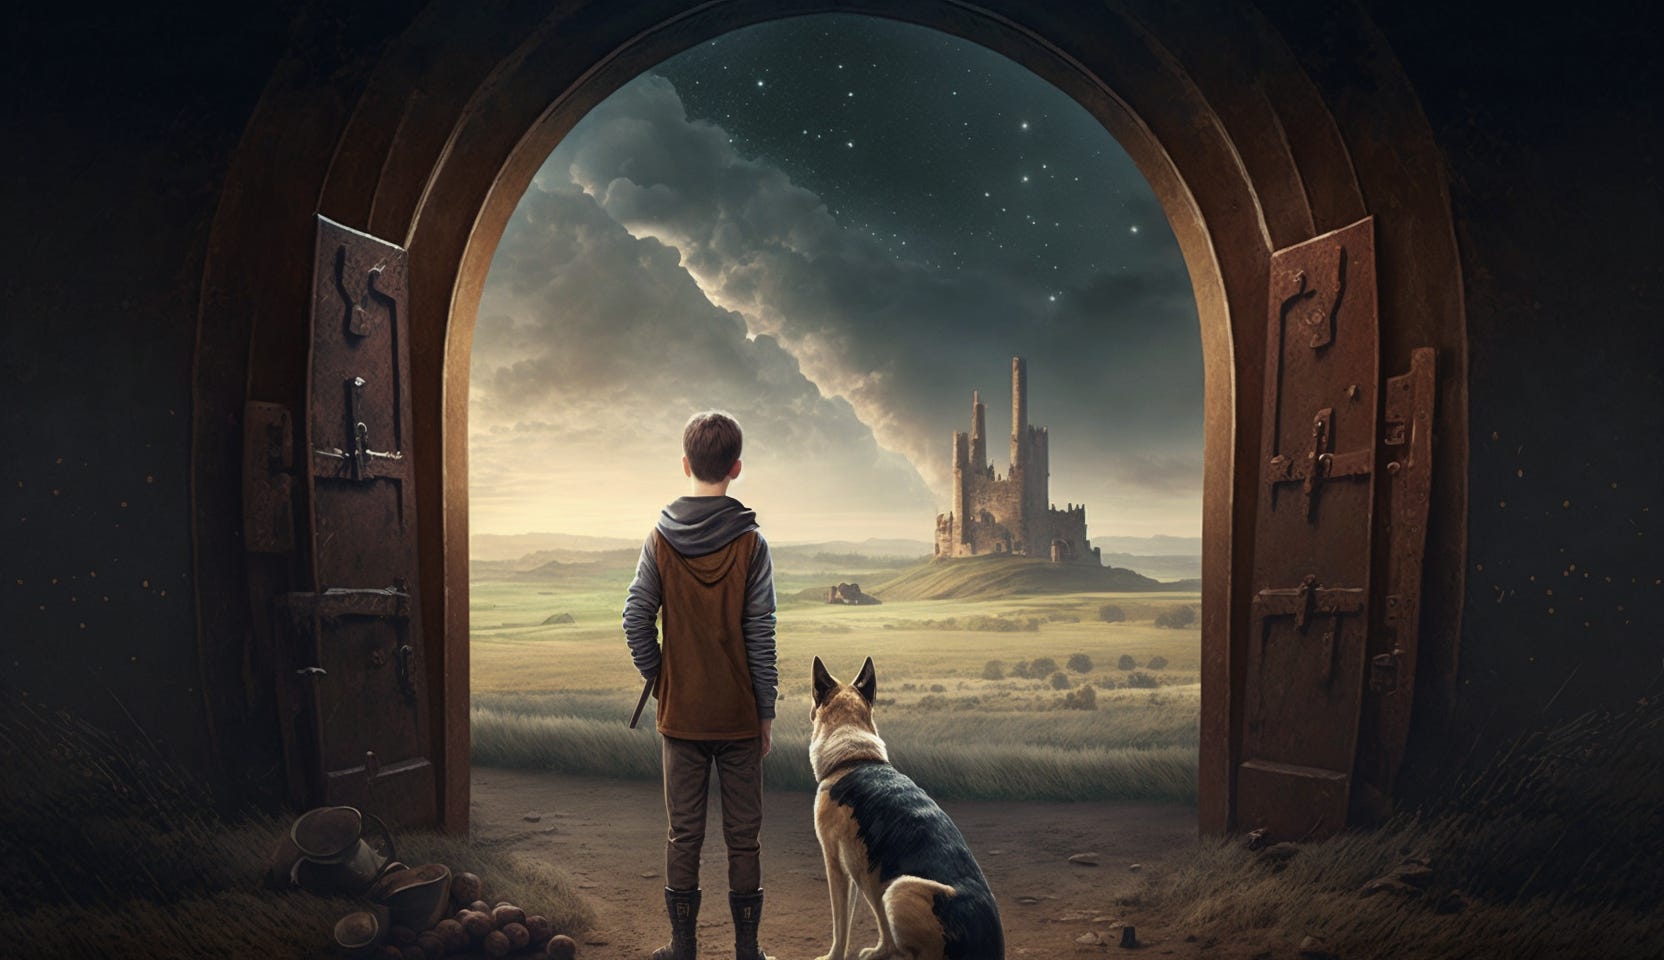 Midjourney painting of a boy and his dog looking across a field at a castle